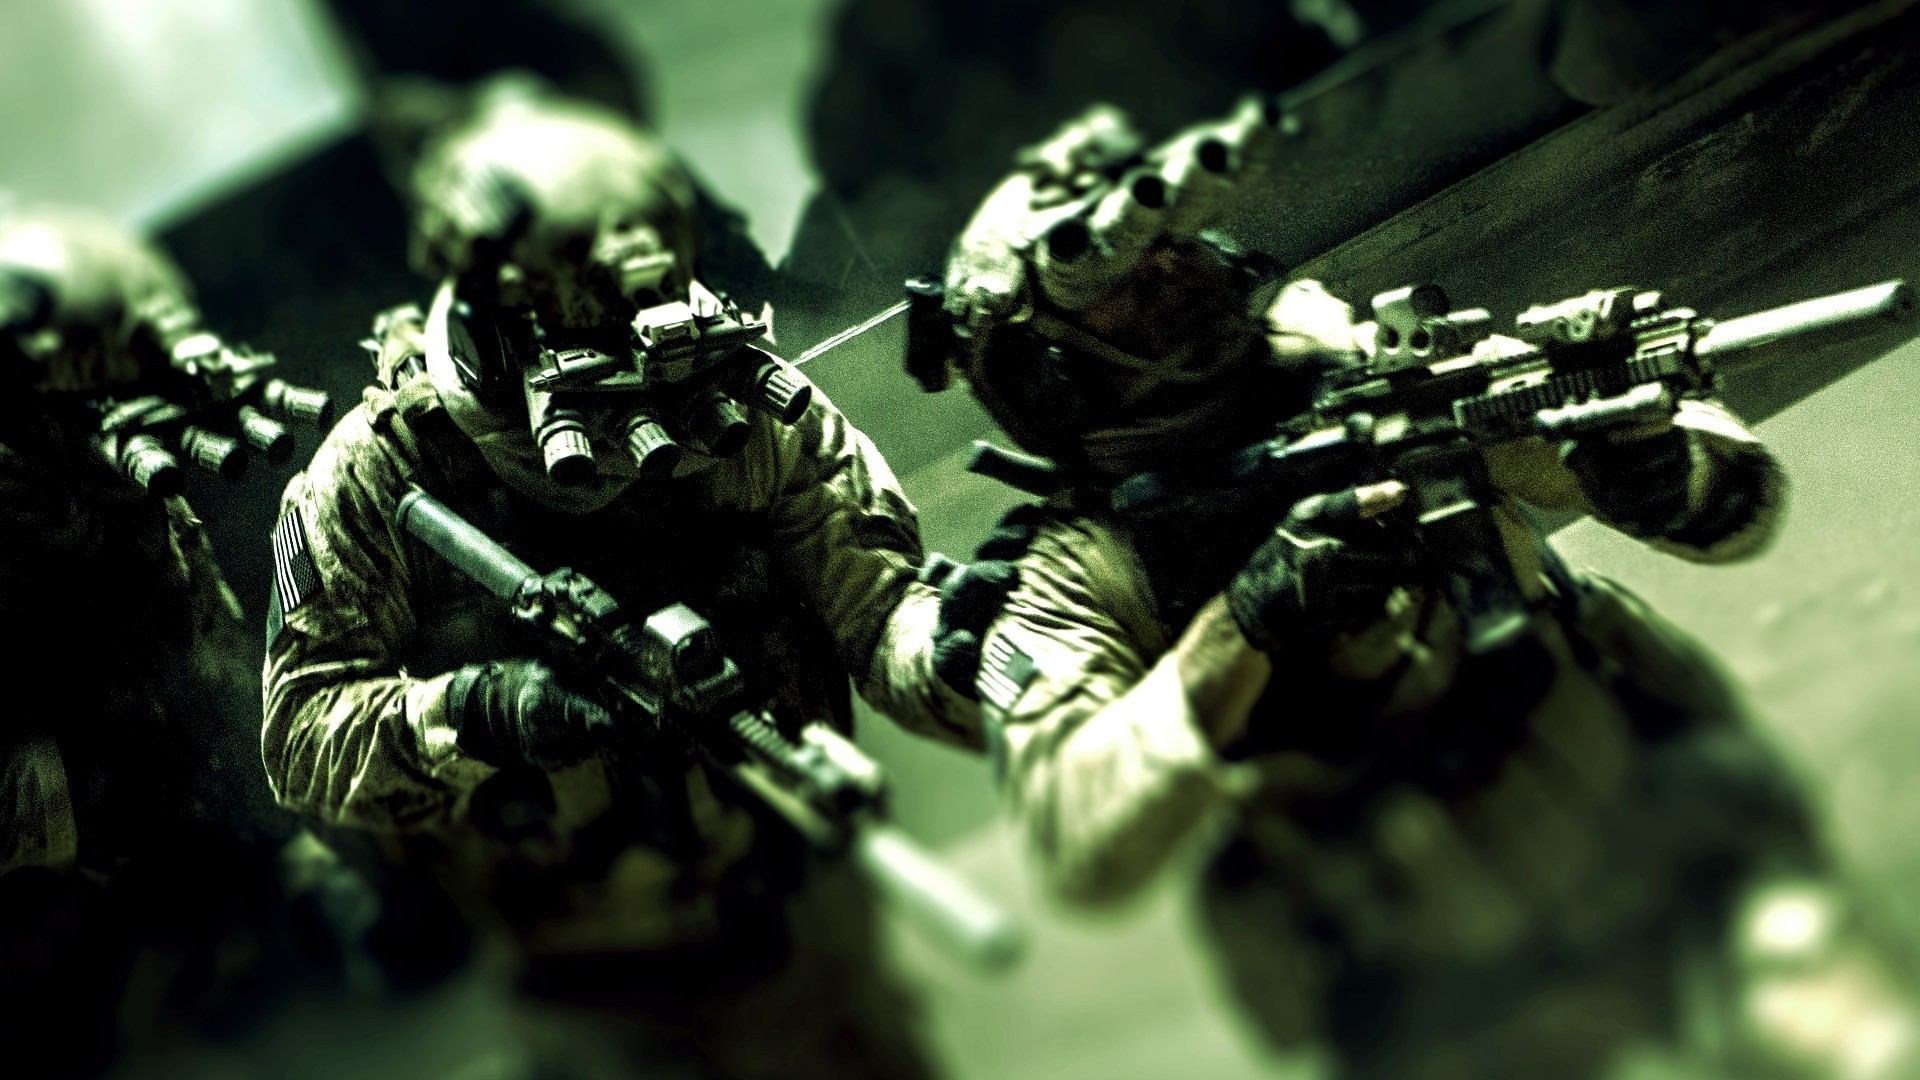 Featured image for “Navy SEAL Mental Training: Fear”